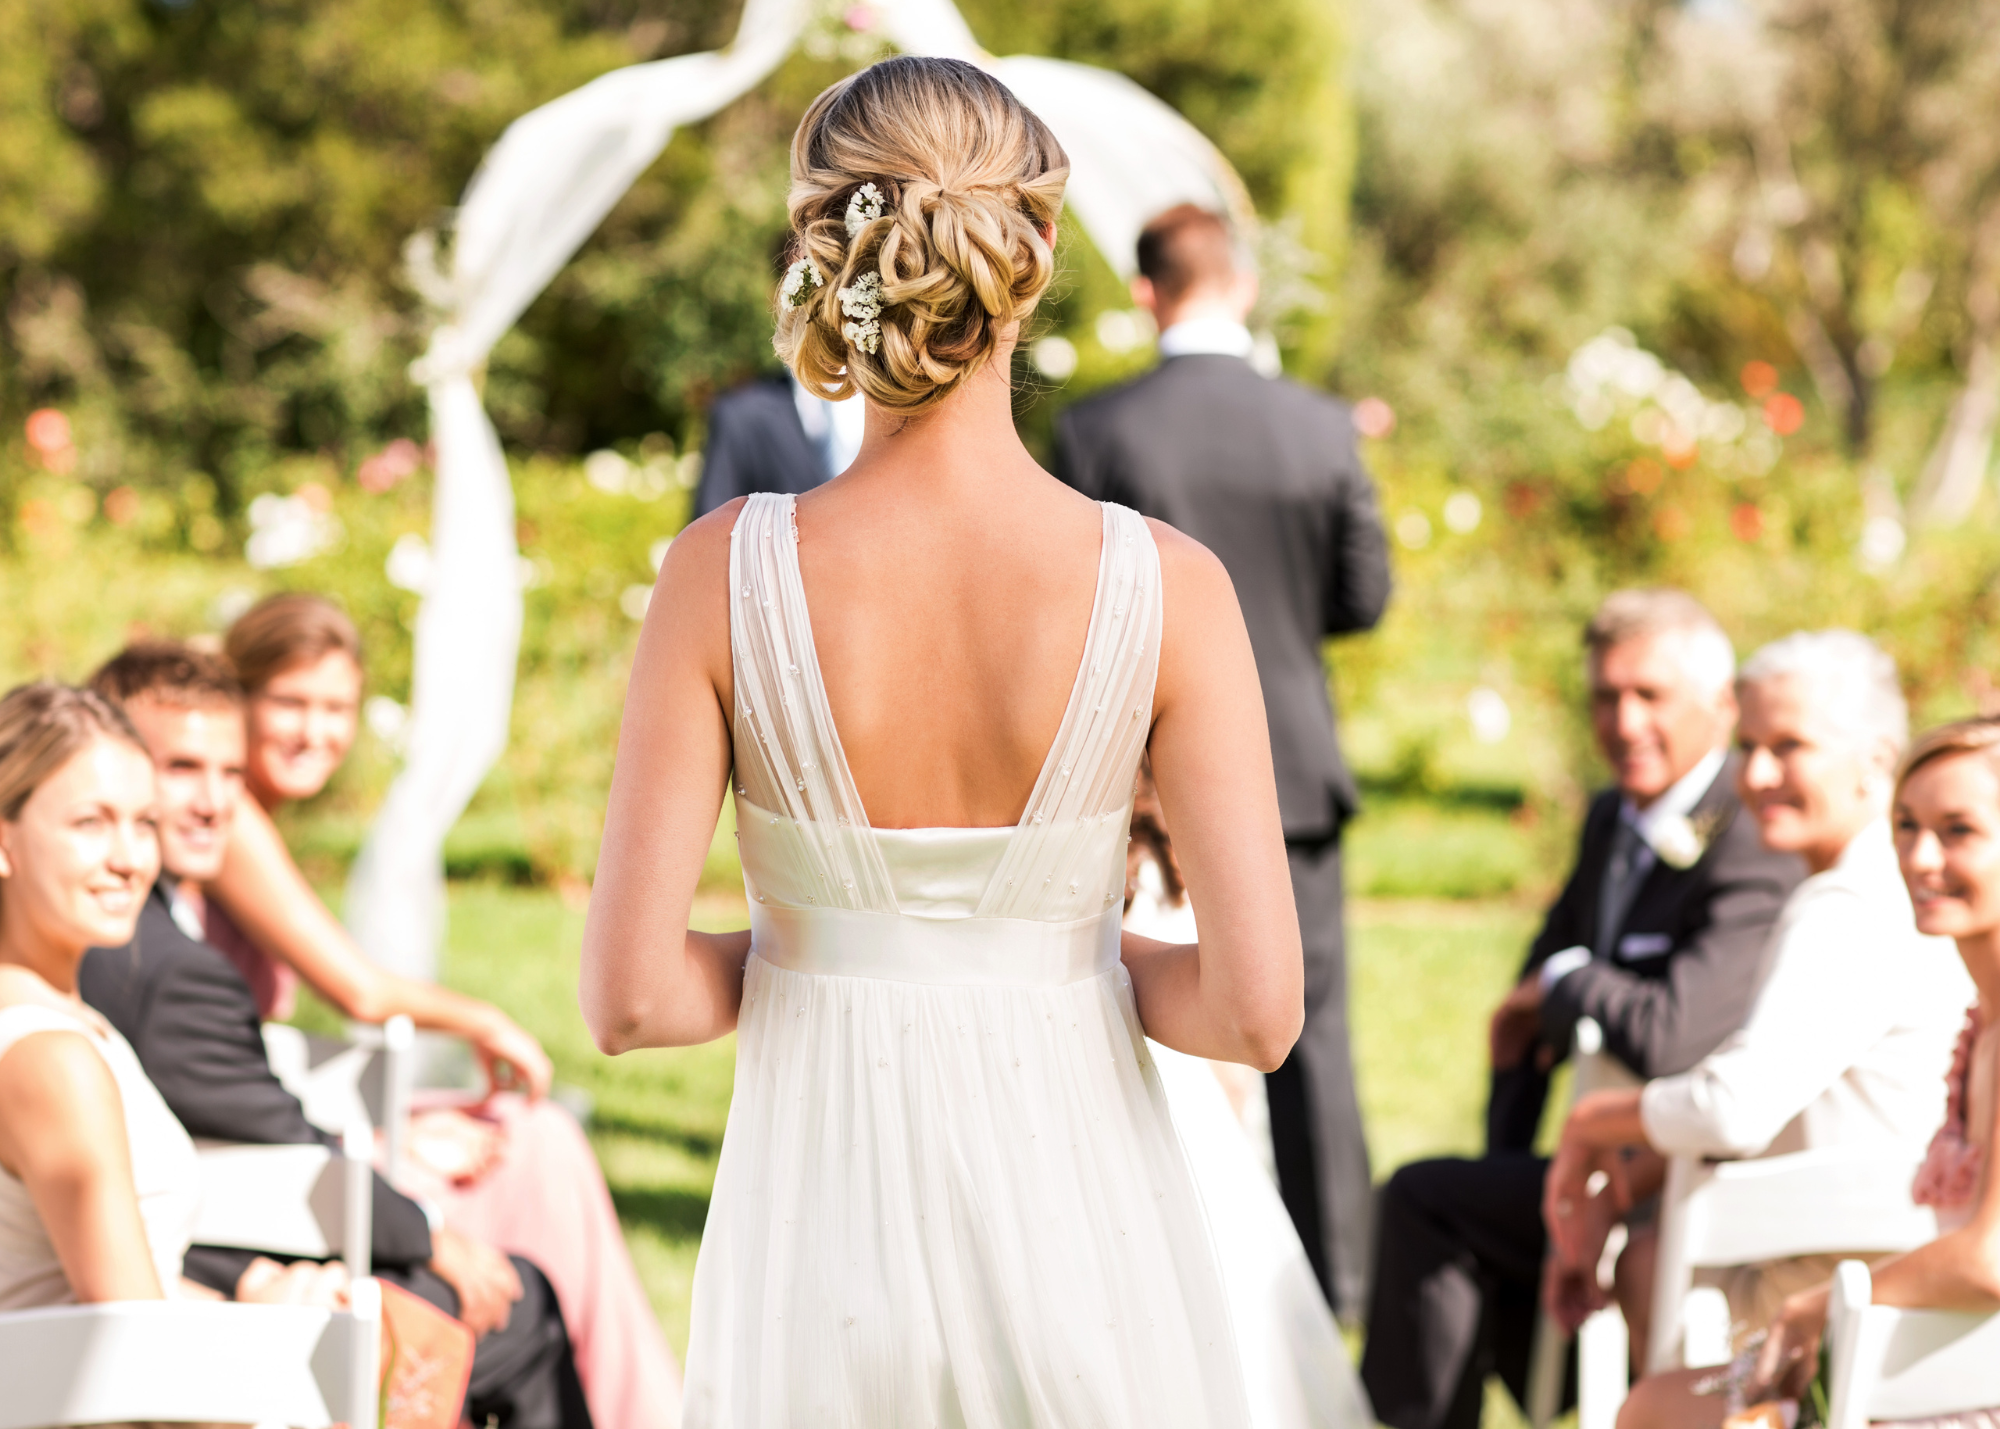 Woman walking down the aisle to get married